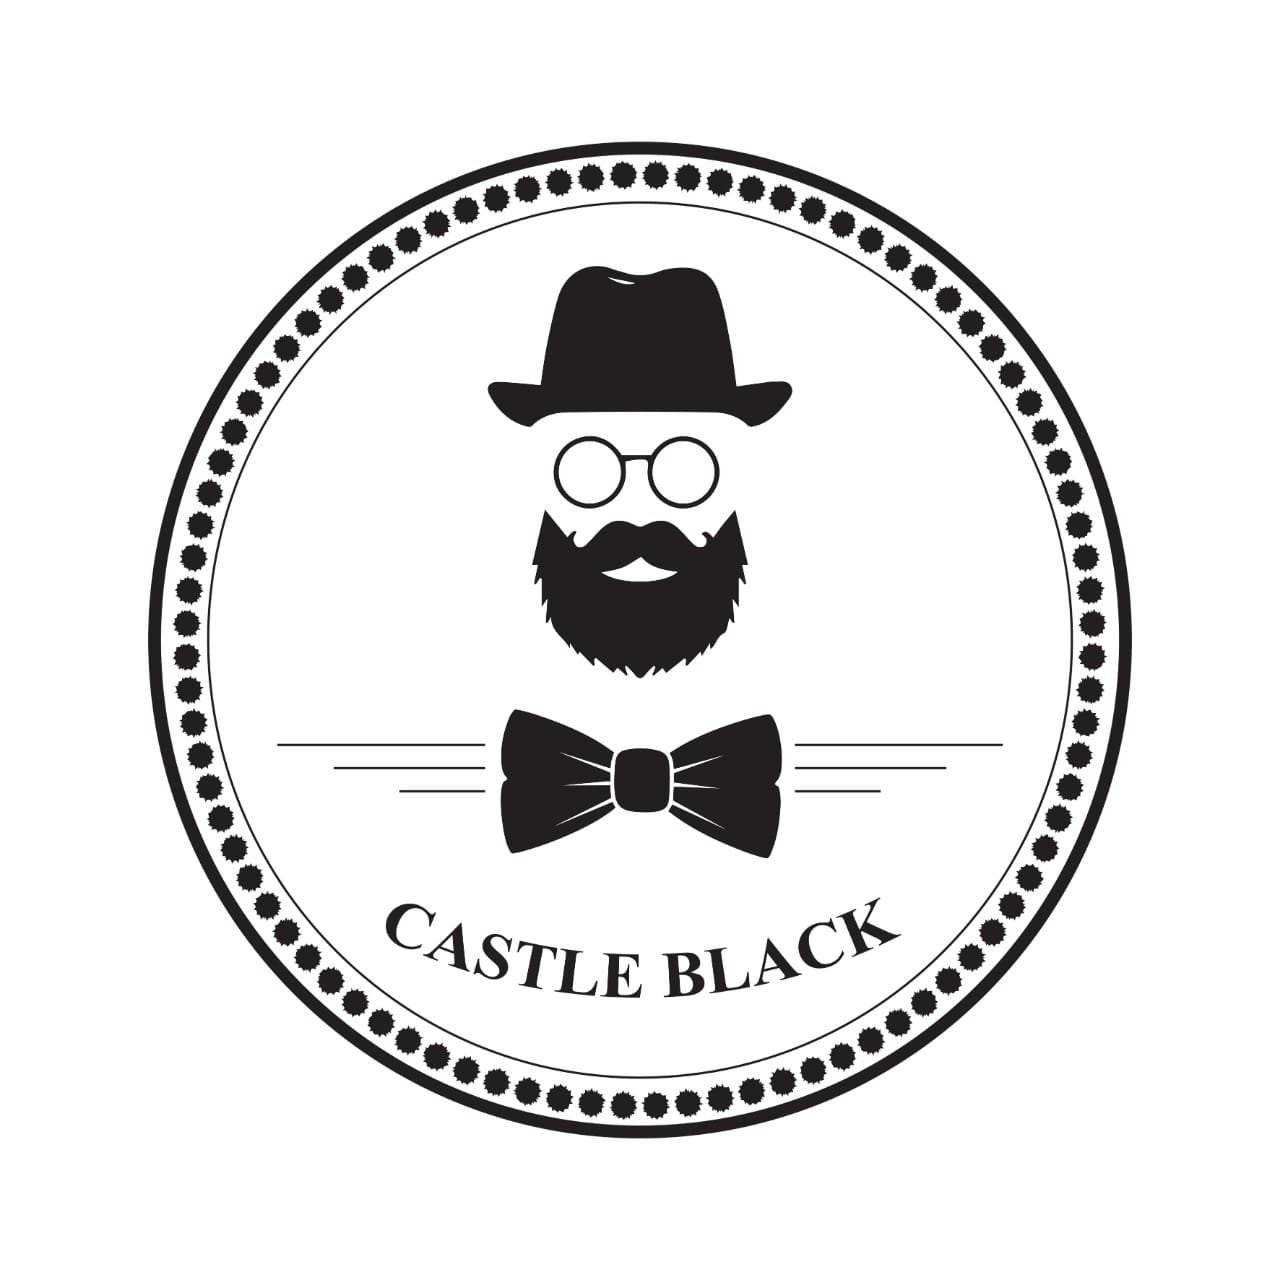 Castle black shave and spa